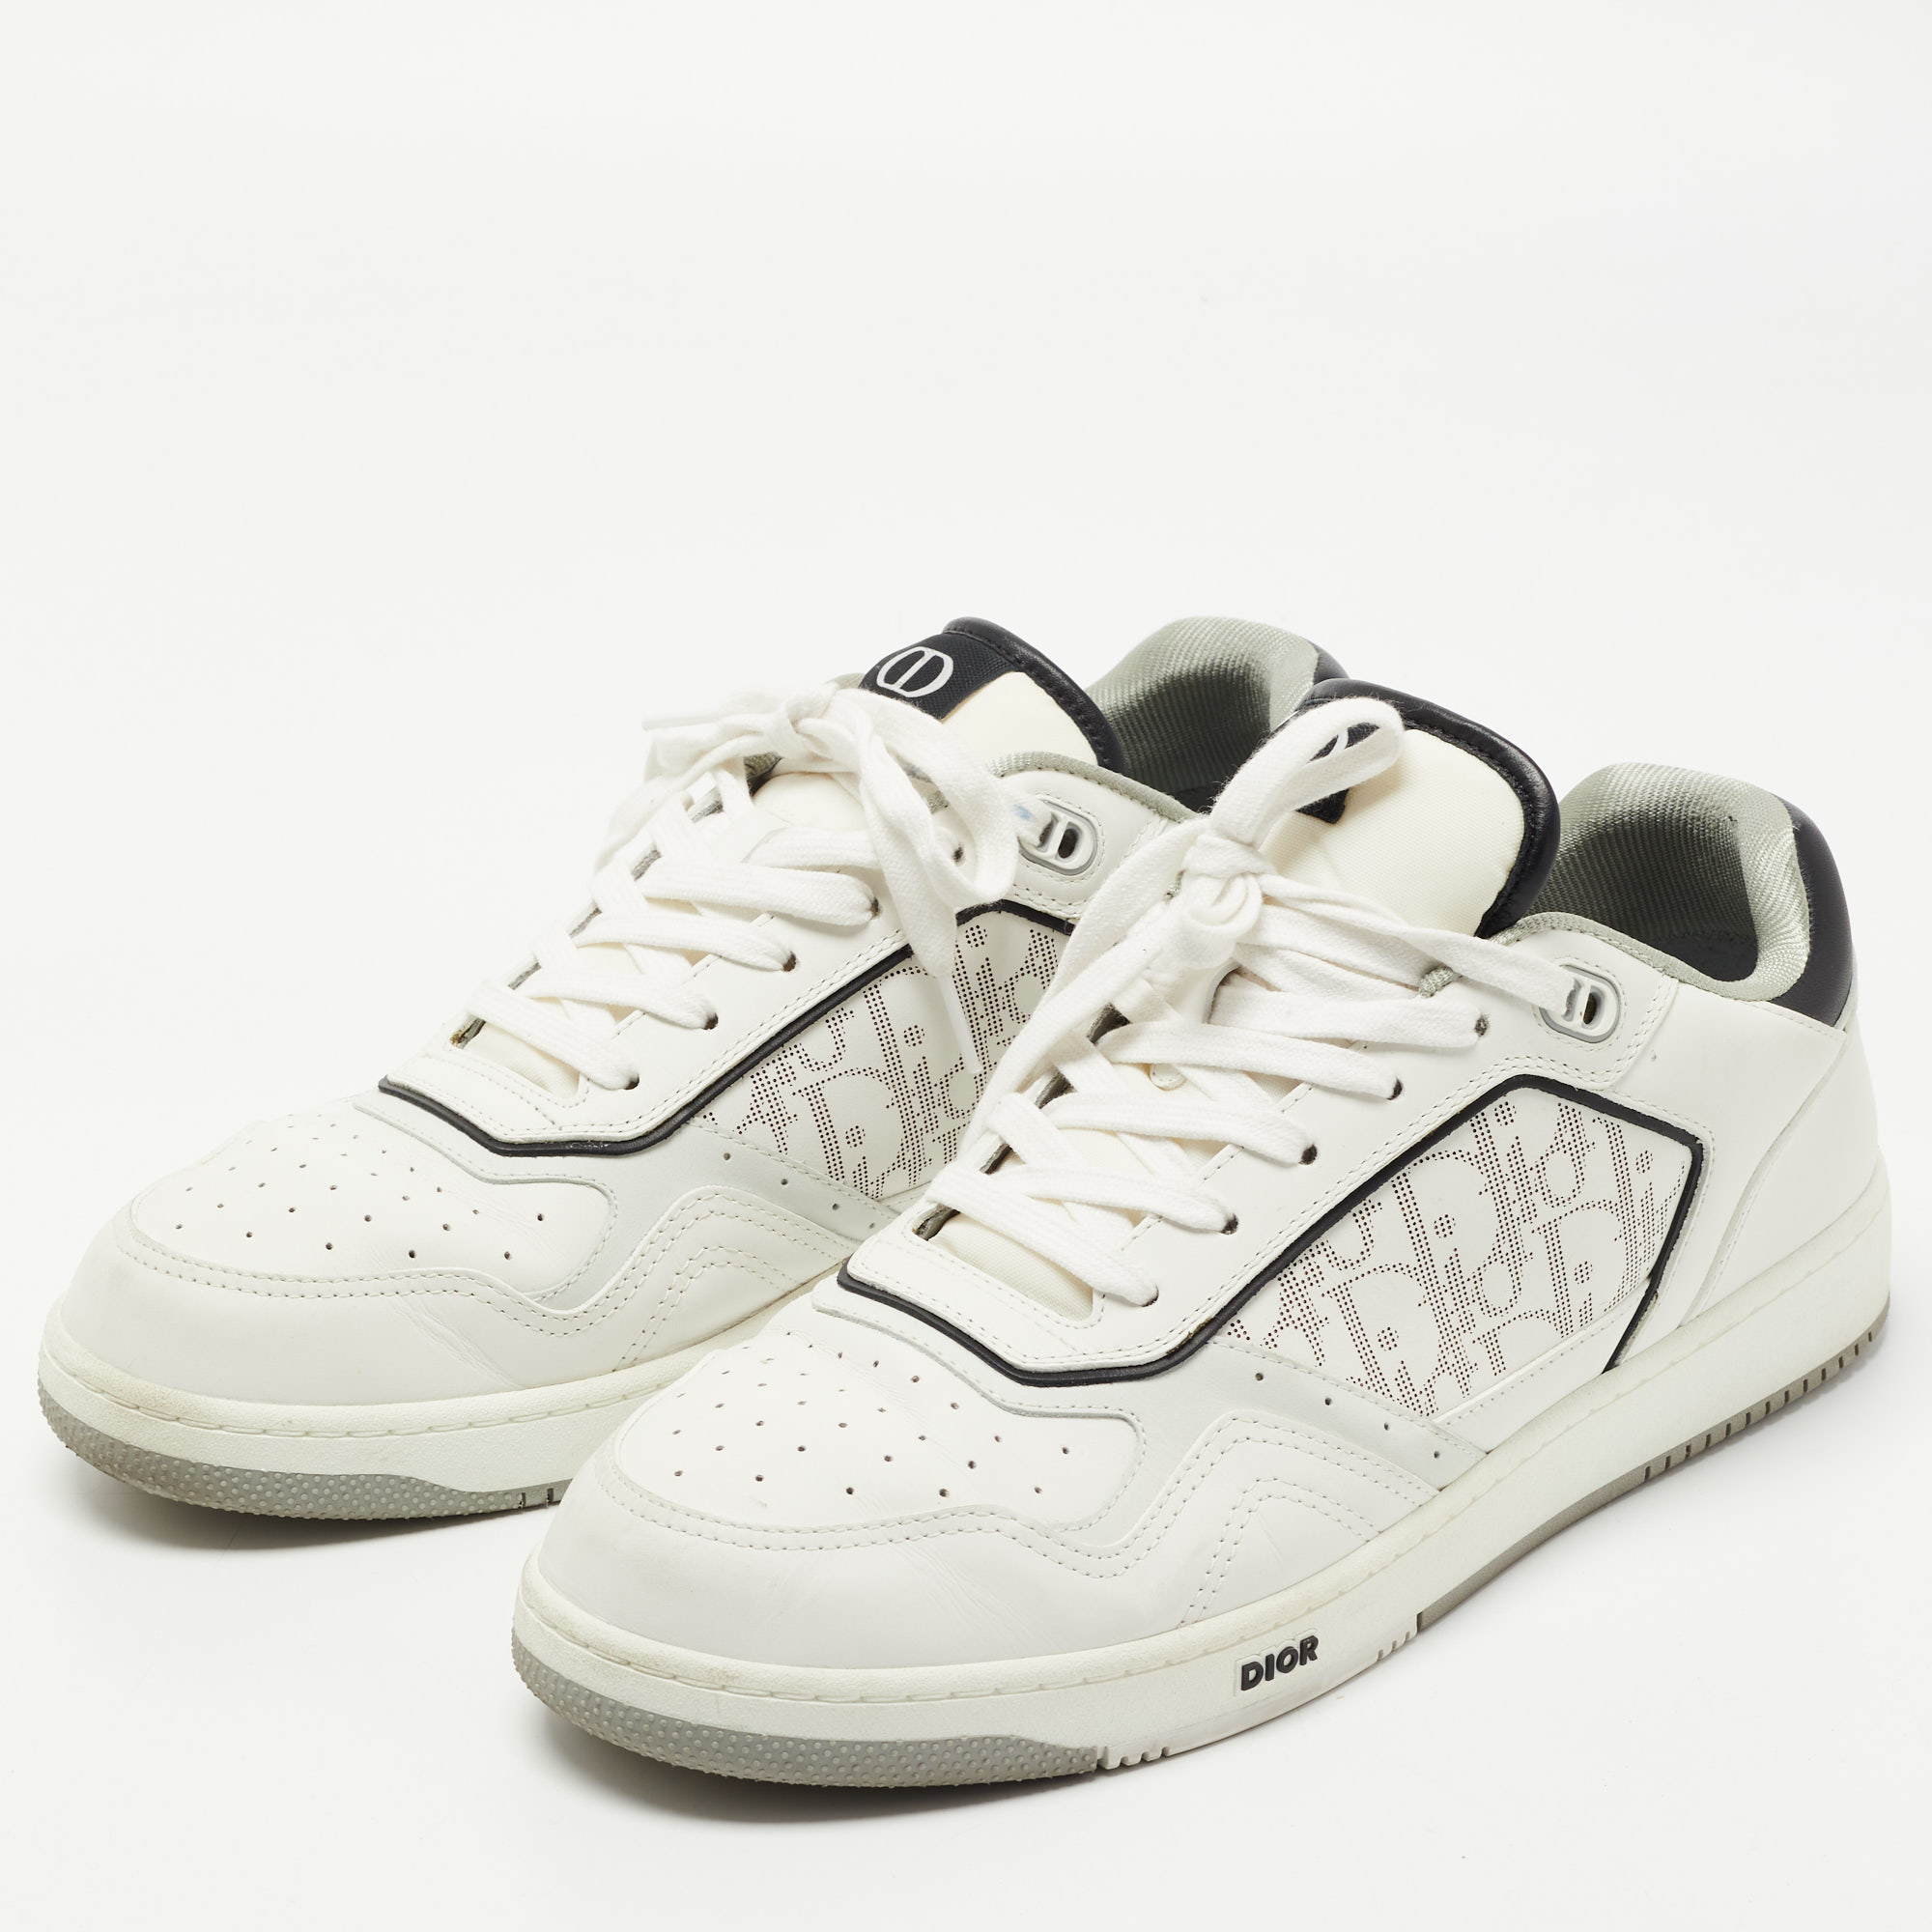 

Dior White Leather B27 Sneakers Size